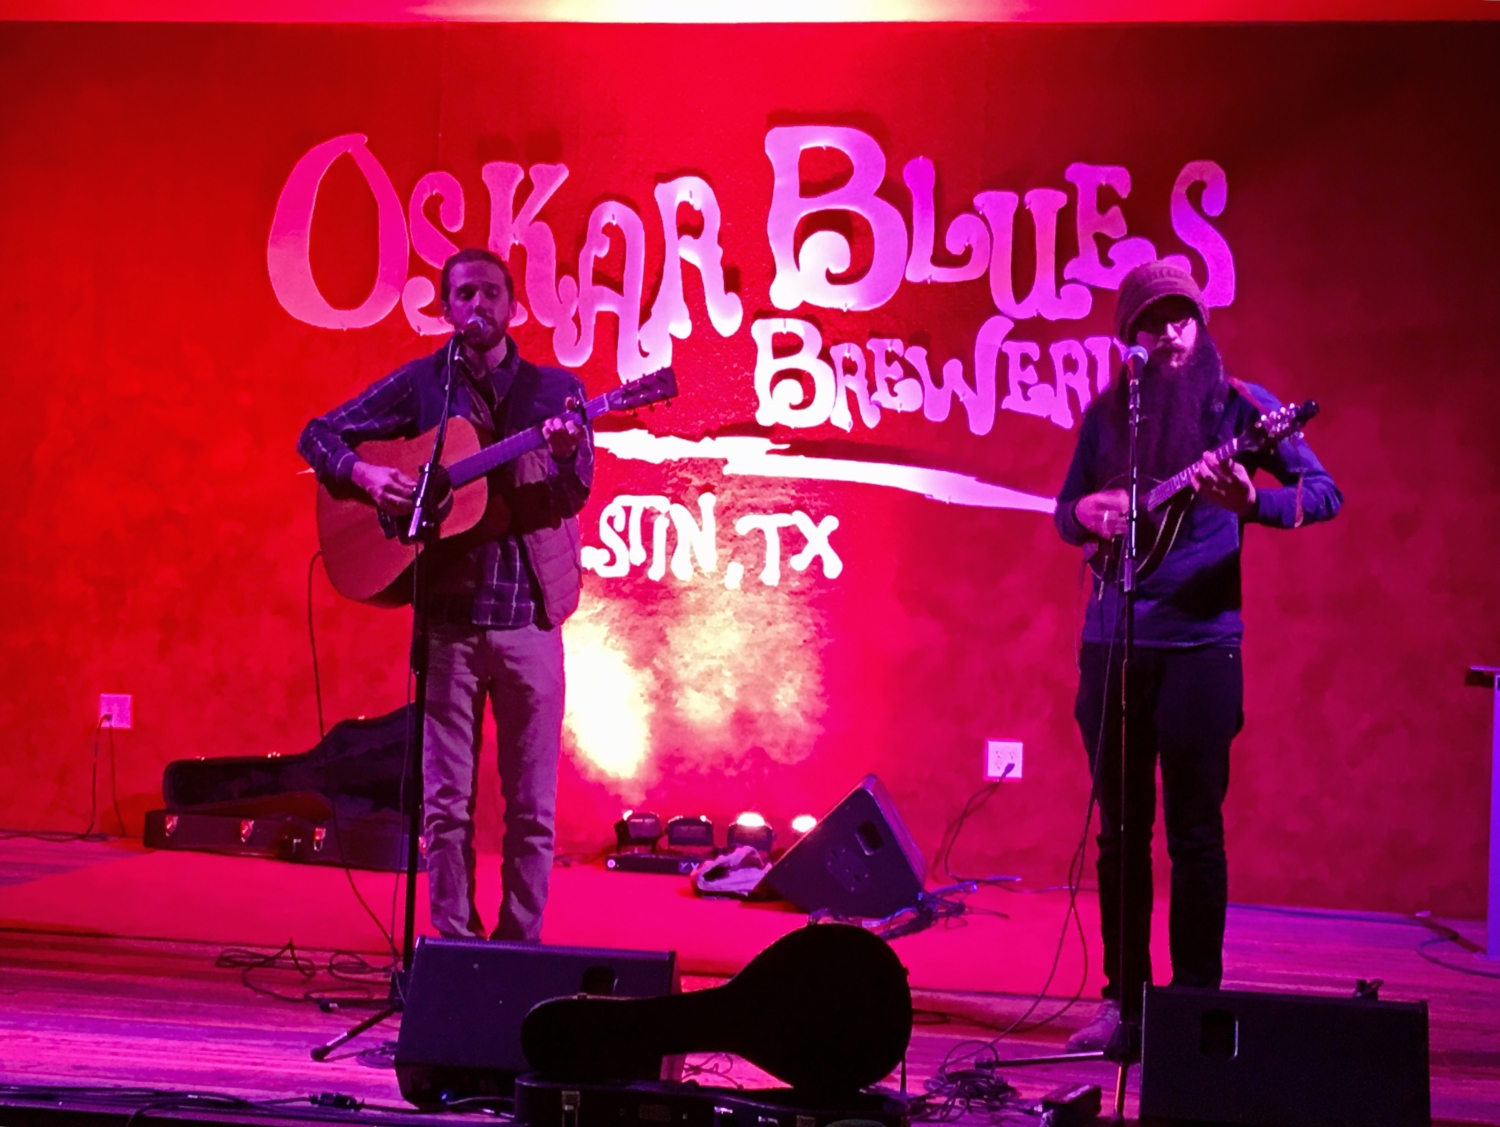 Band performs live at Oskar Blues Brewery. Check out the various locations in this blog post along the 3M Half Marathon course and get to know Austin.